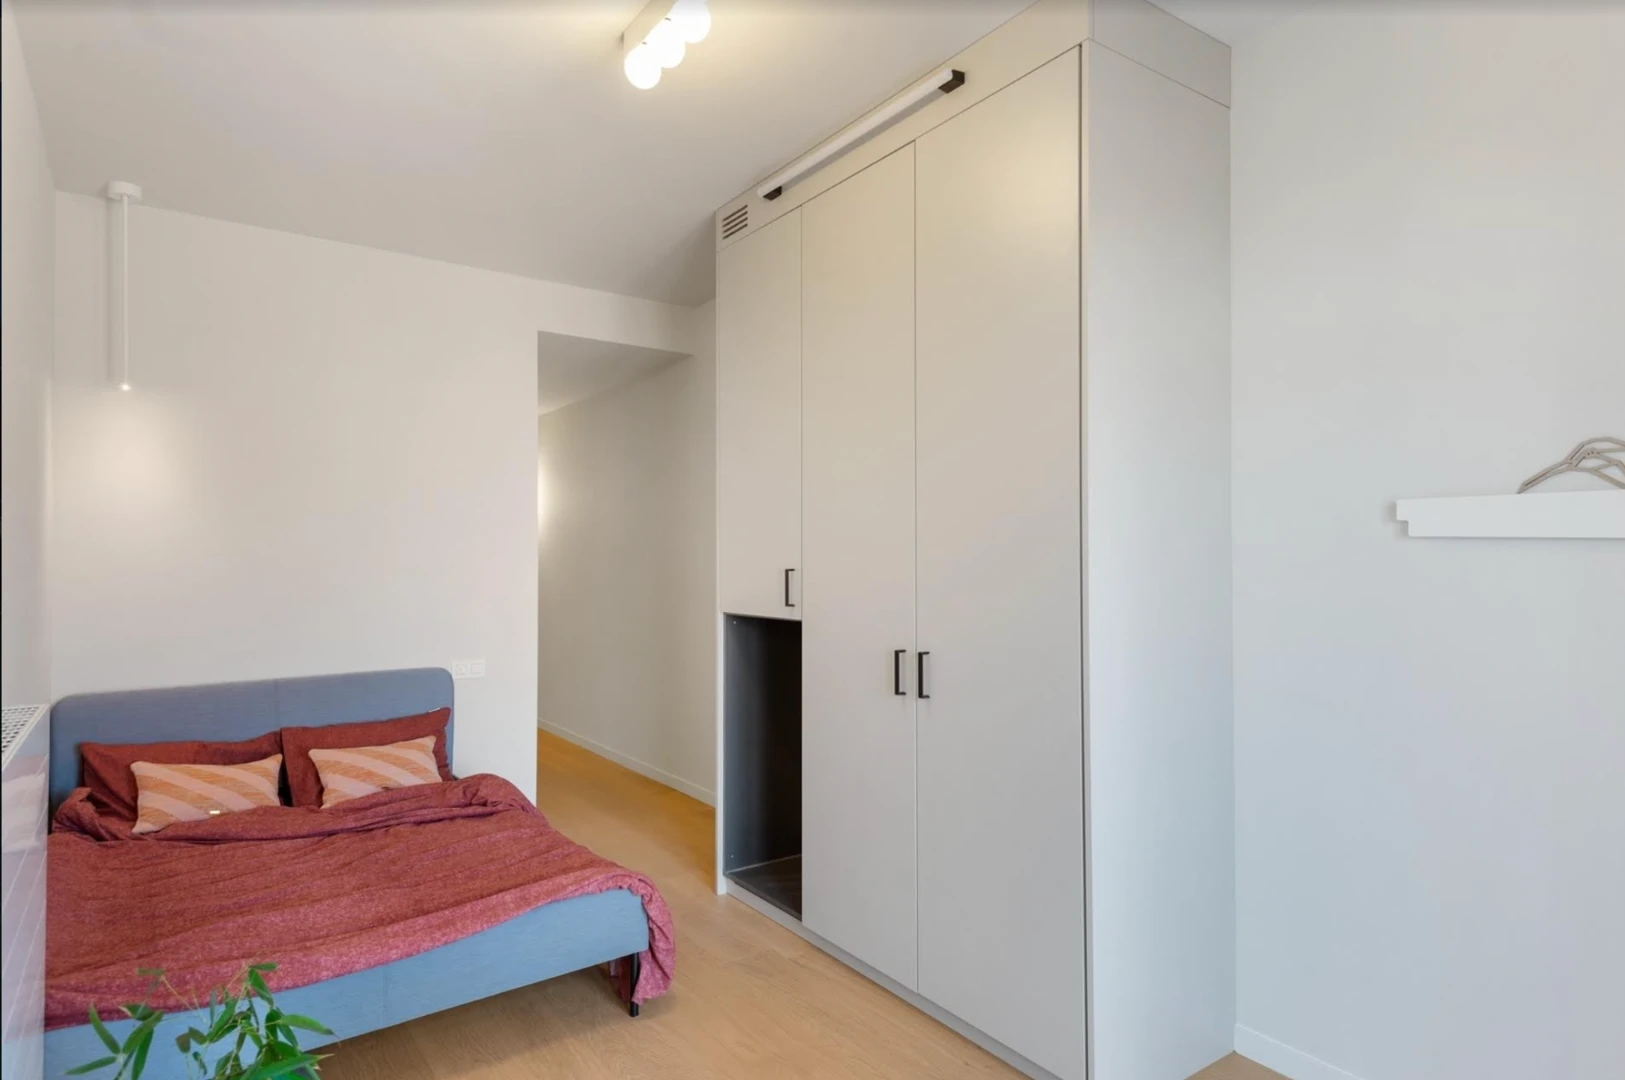 Room for rent in a shared flat in Antwerp